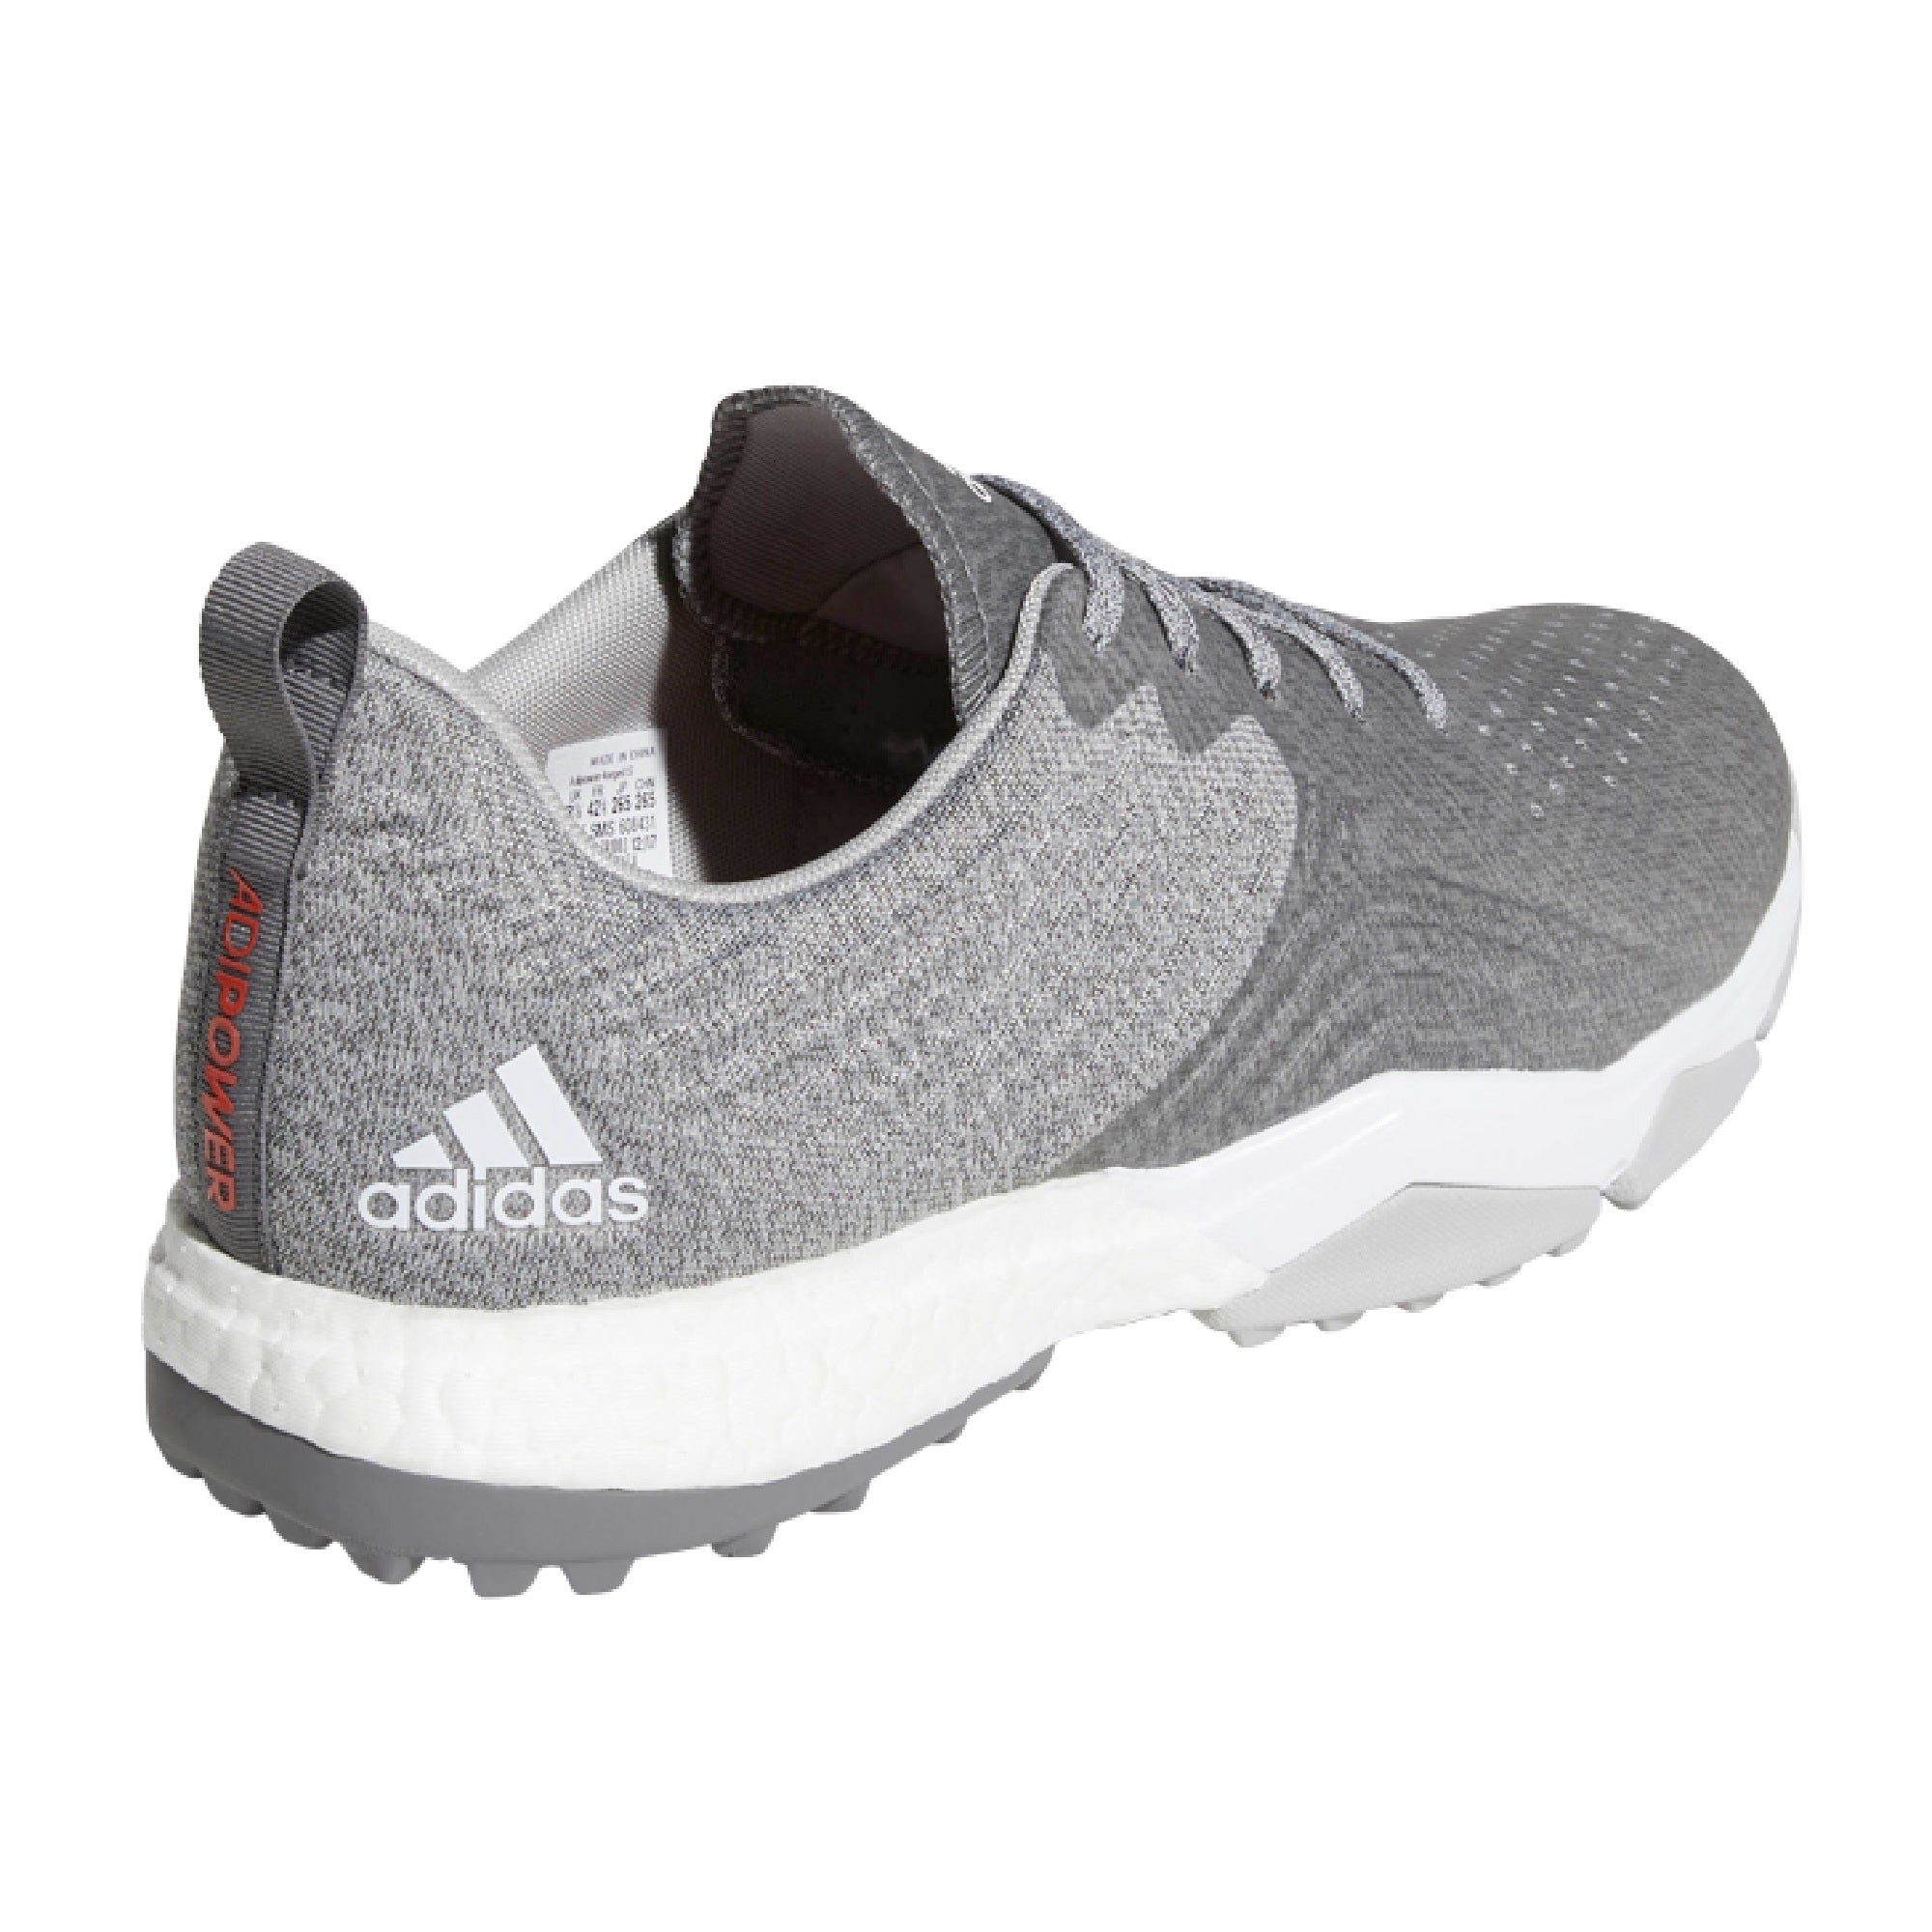 adidas adipower 4orged s golf shoes